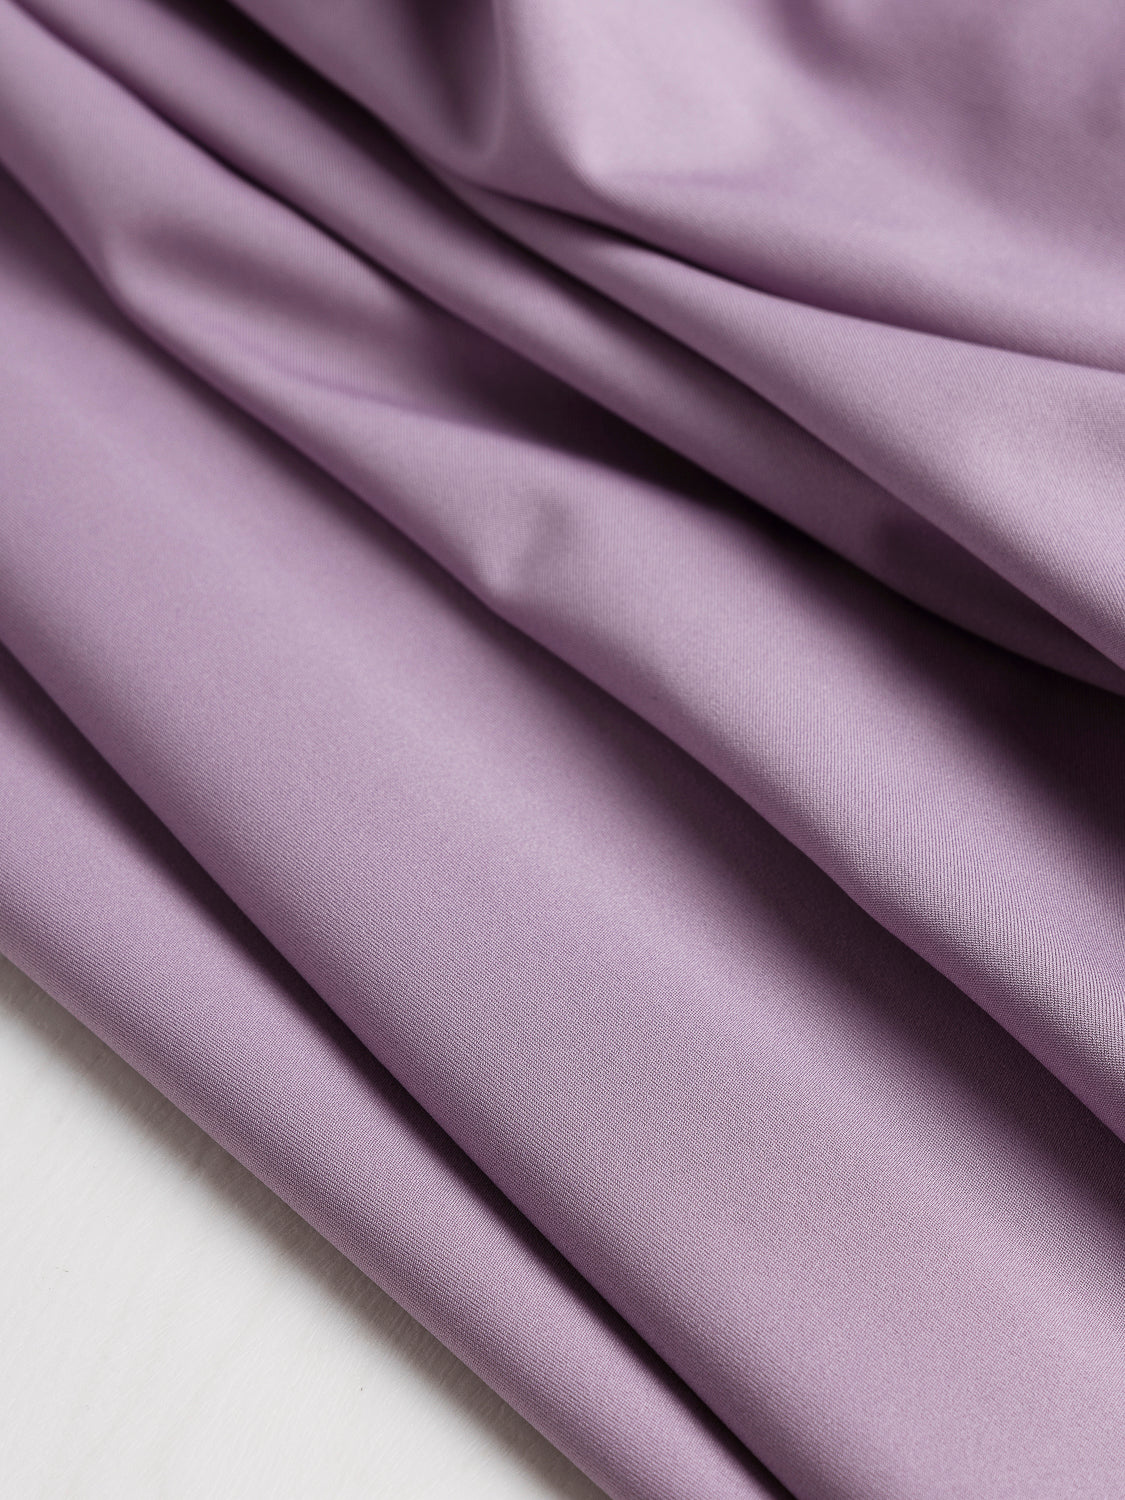 Stretch Performance Knit Wicking Recycled Polyester - Violet | Core Fabrics